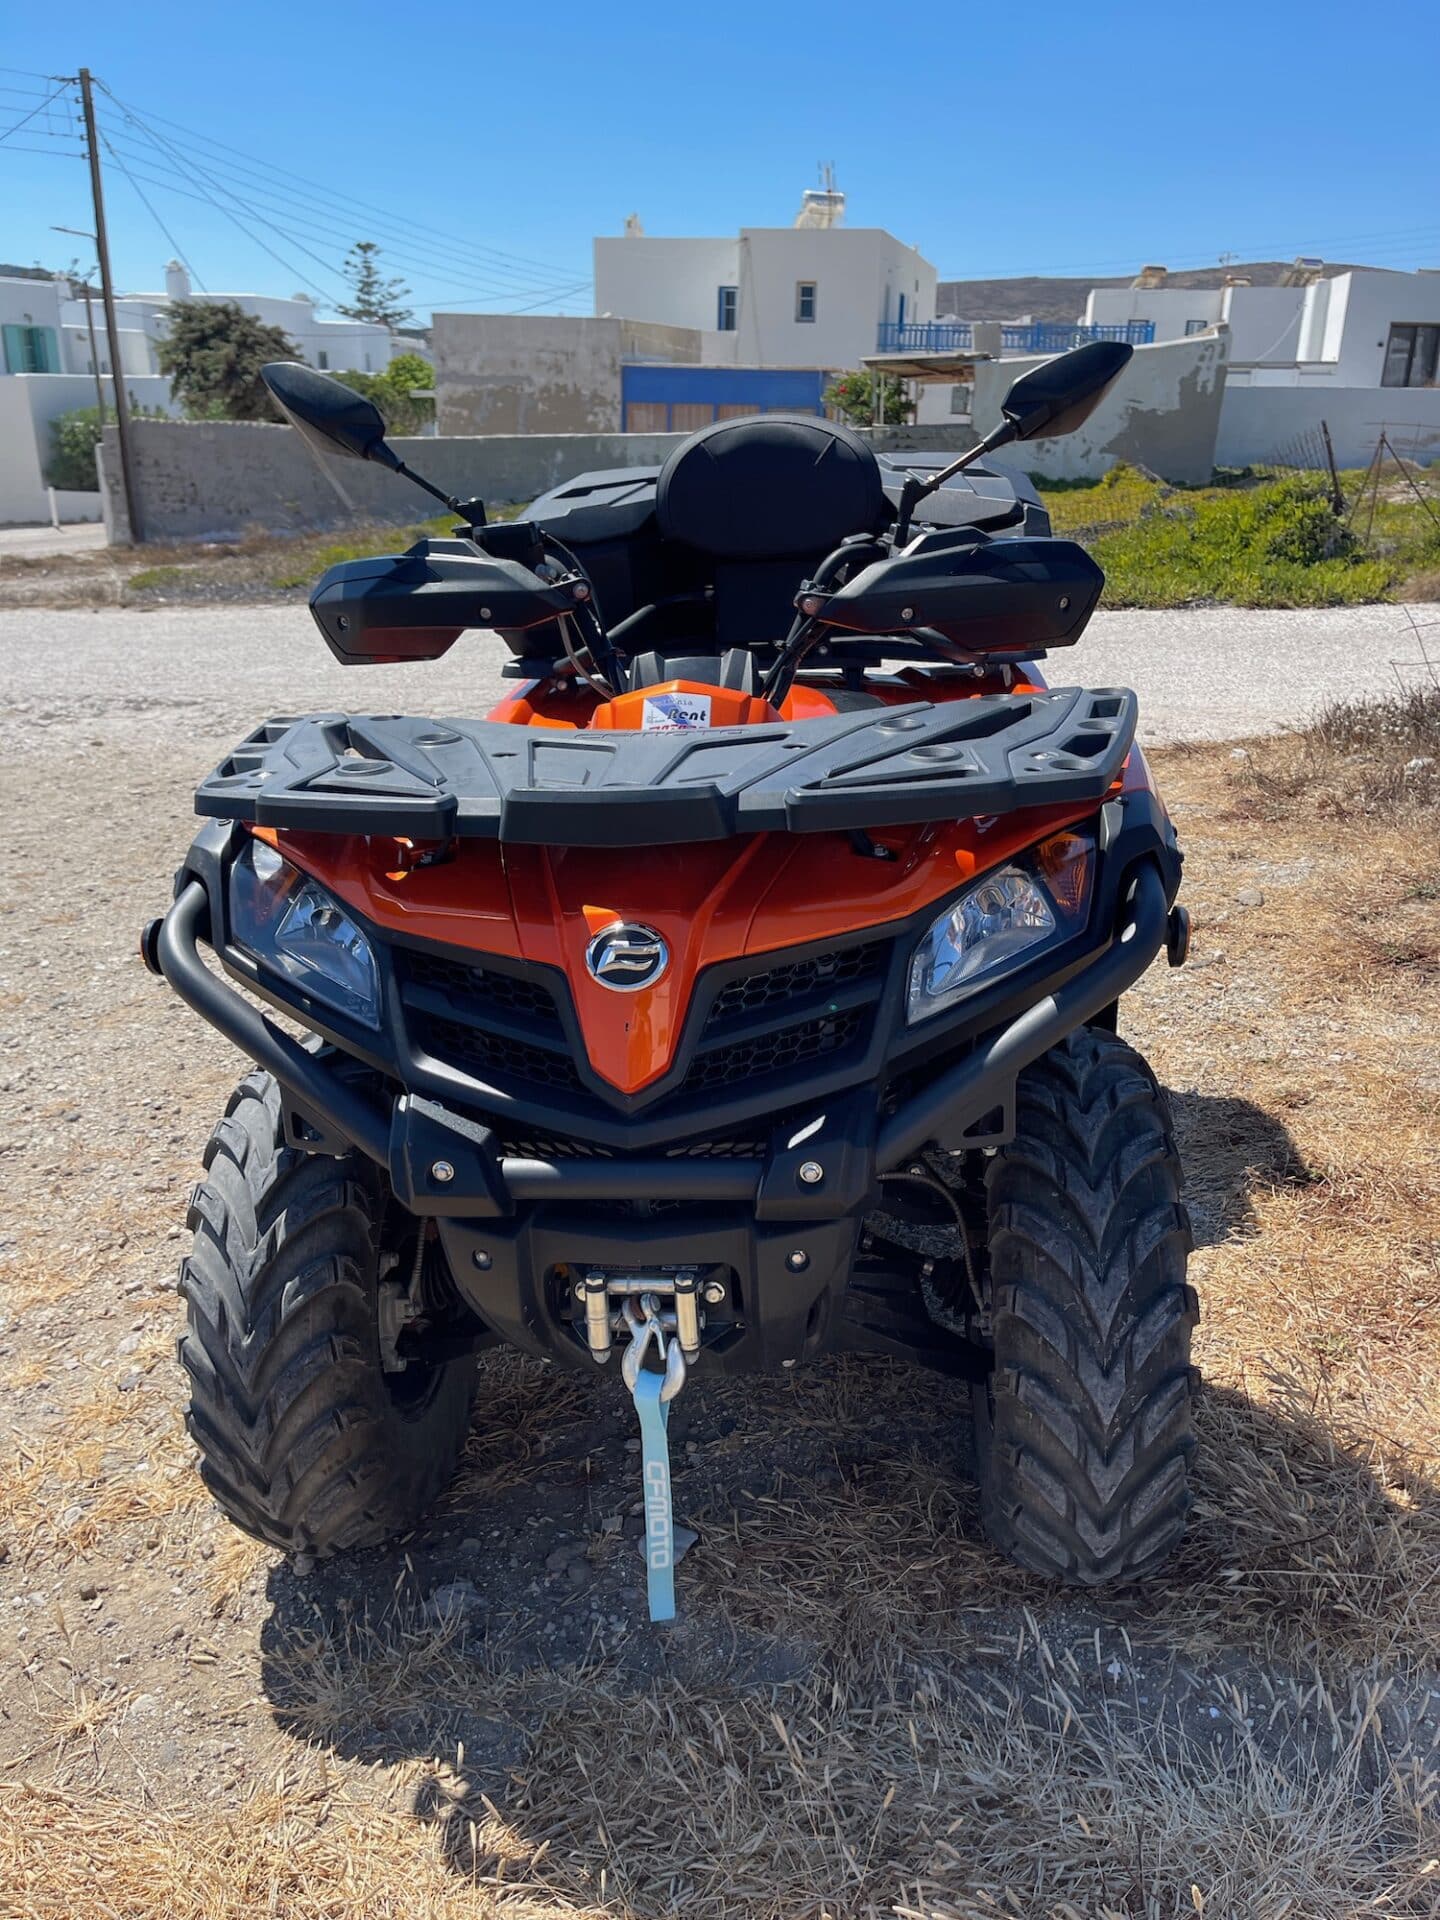 Front view of an orange ATV quad bike with a 'CFMOTO' logo, ready for an adventurous ride around the rugged terrain of Milos, with white Cycladic houses in the background.